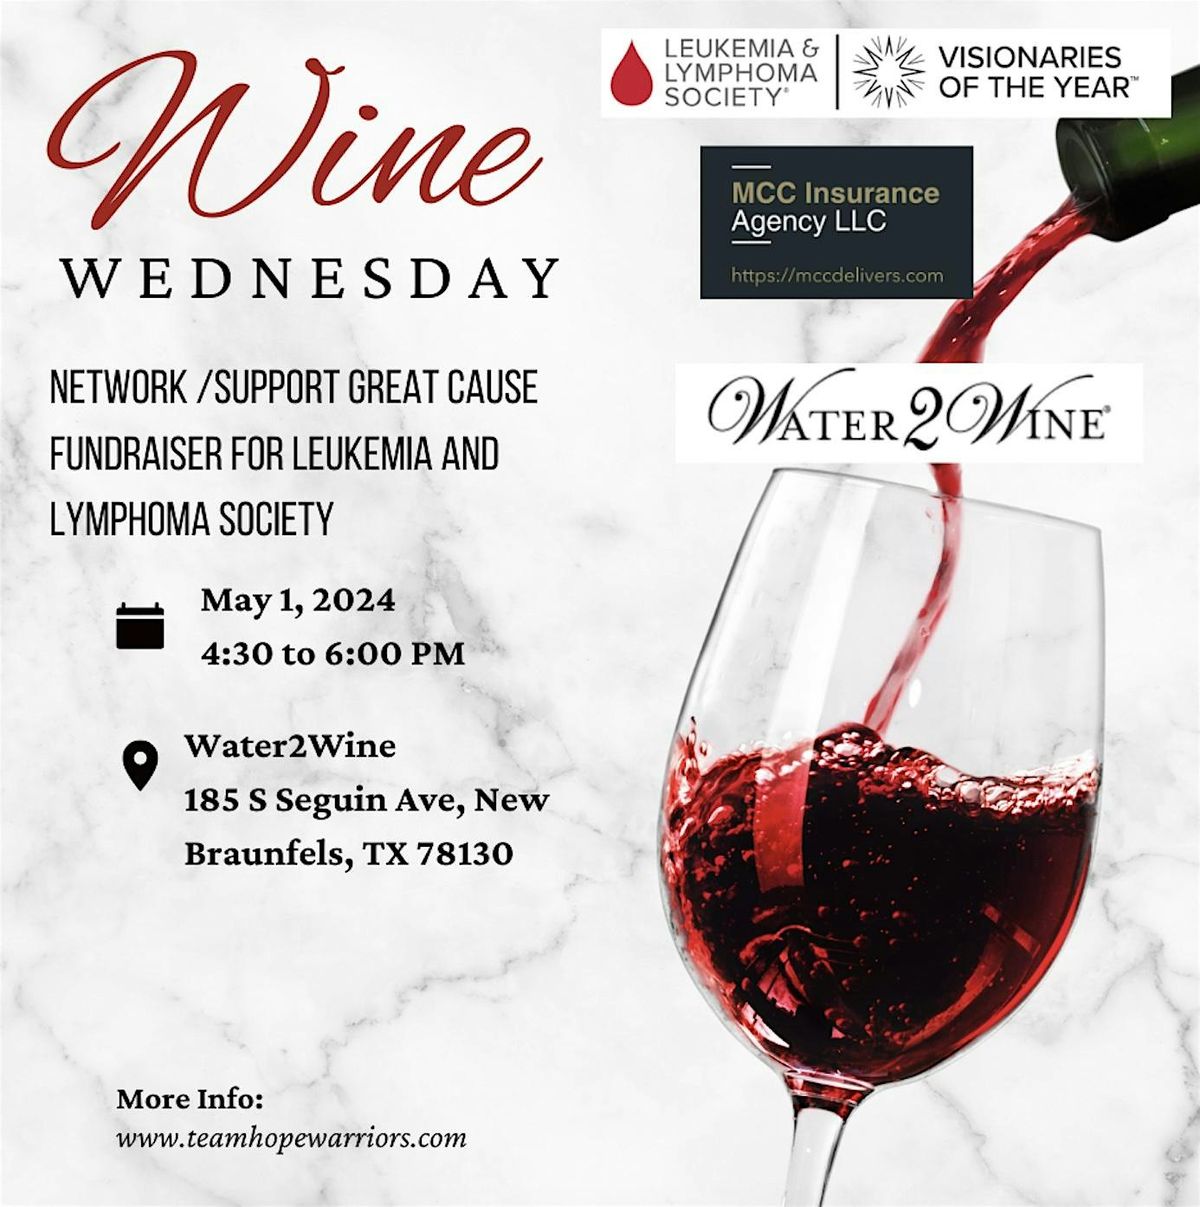 Network for a Cause - Wine Wednesday